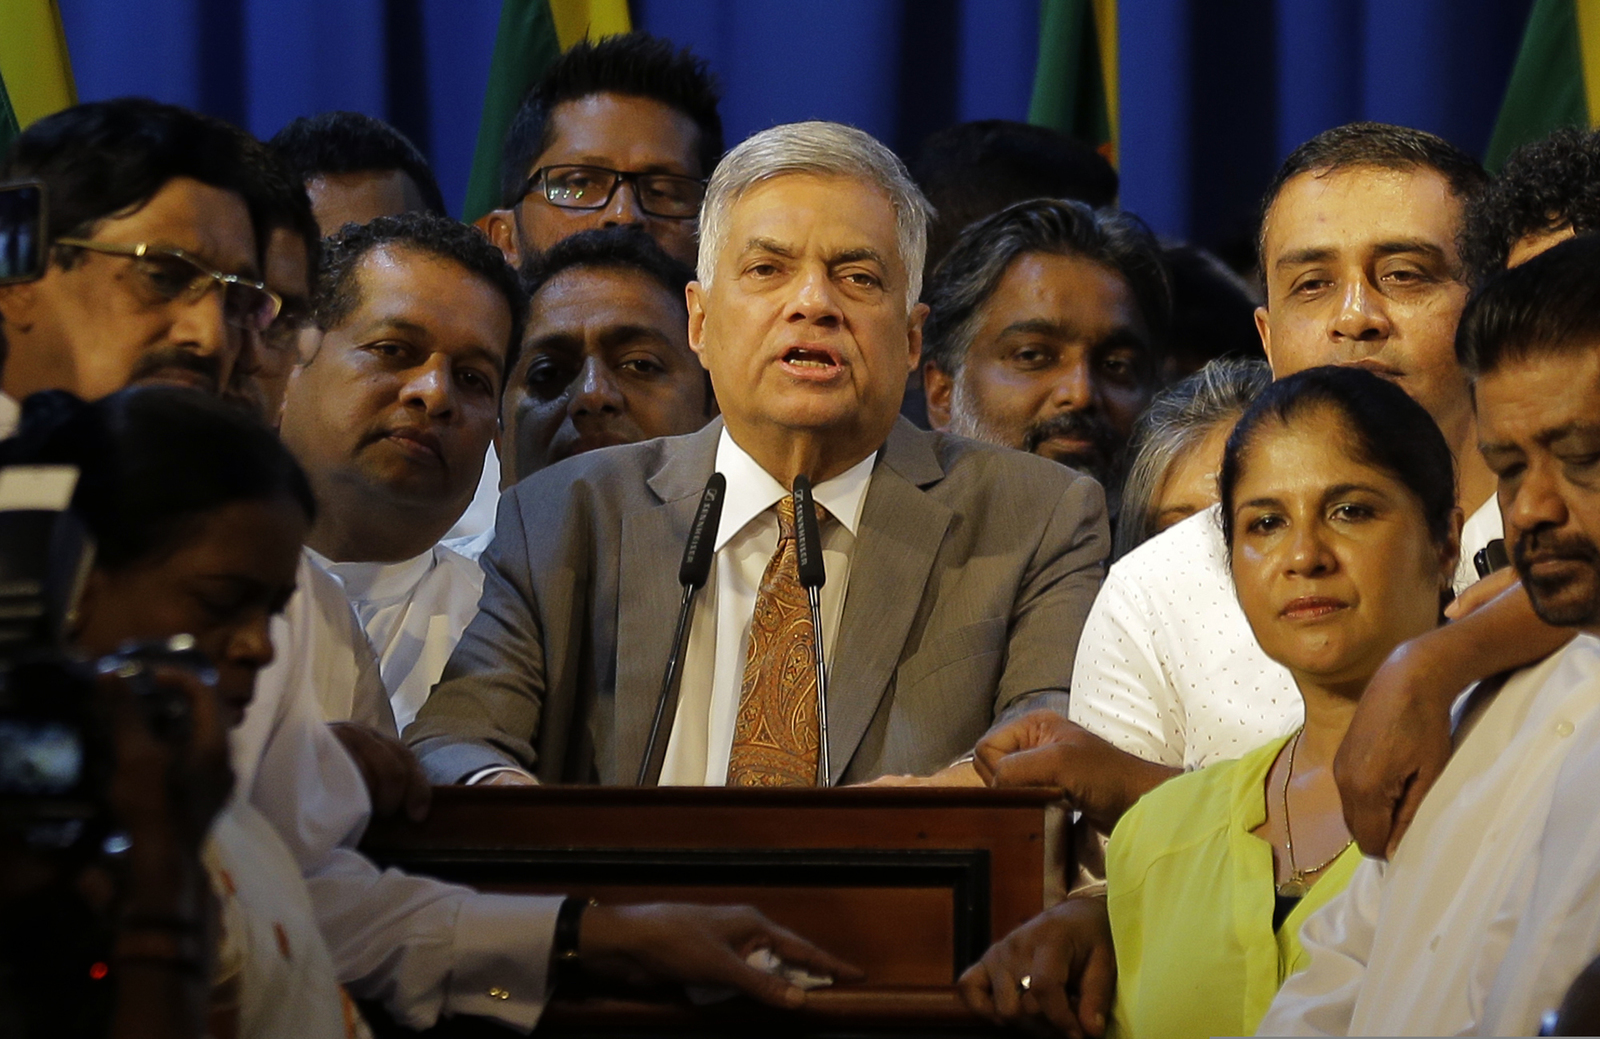 sri-lankan-president-doubts-he-can-work-with-reappointed-pm-richmond-register-1.jpg